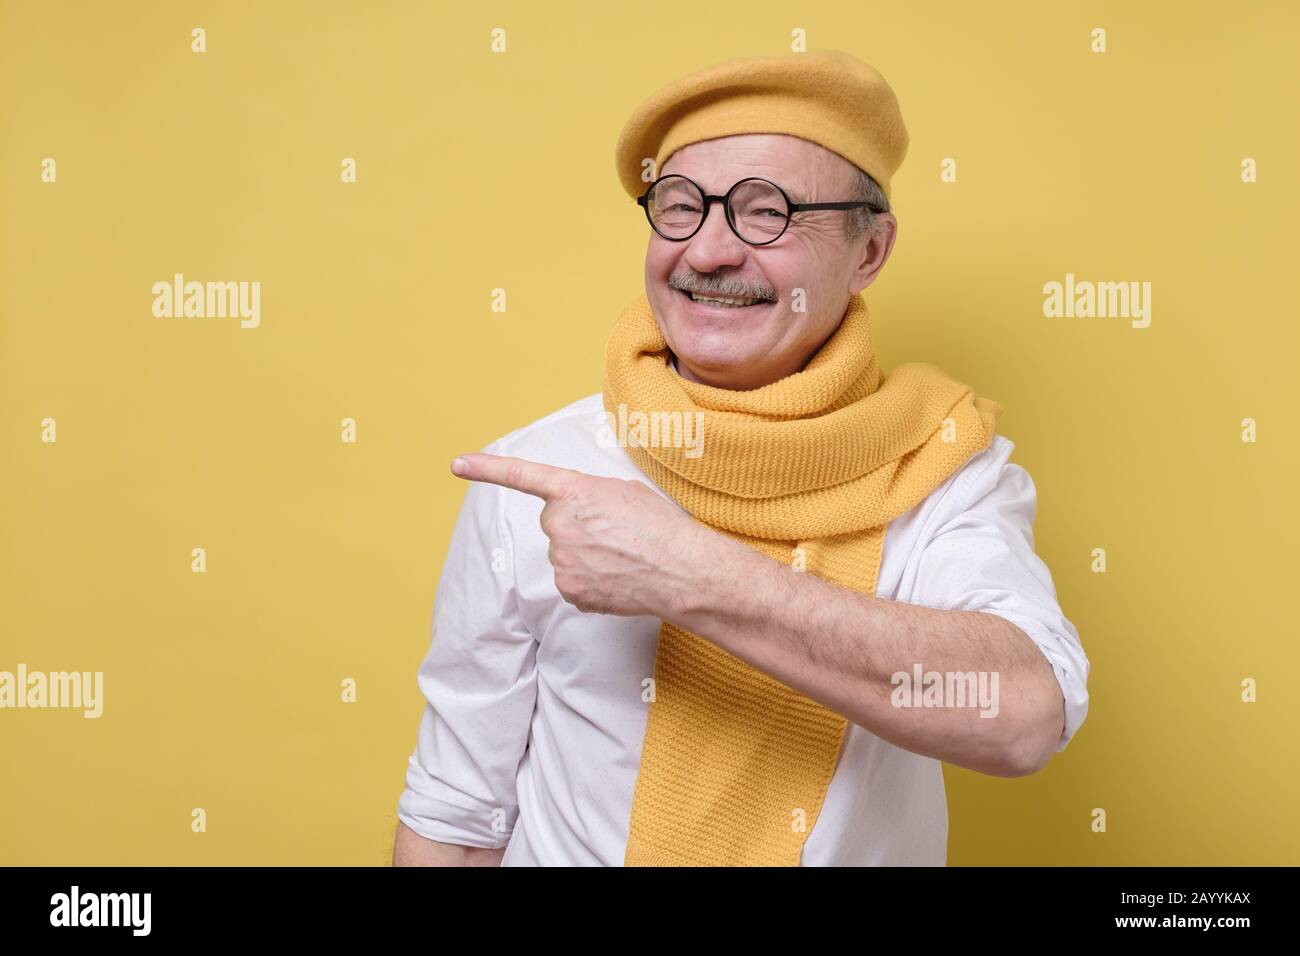 Confident senior smiling man in yellow beret and scarf point away. Serious mature male gesturing with his finger aside on yellow background. Stock Photo